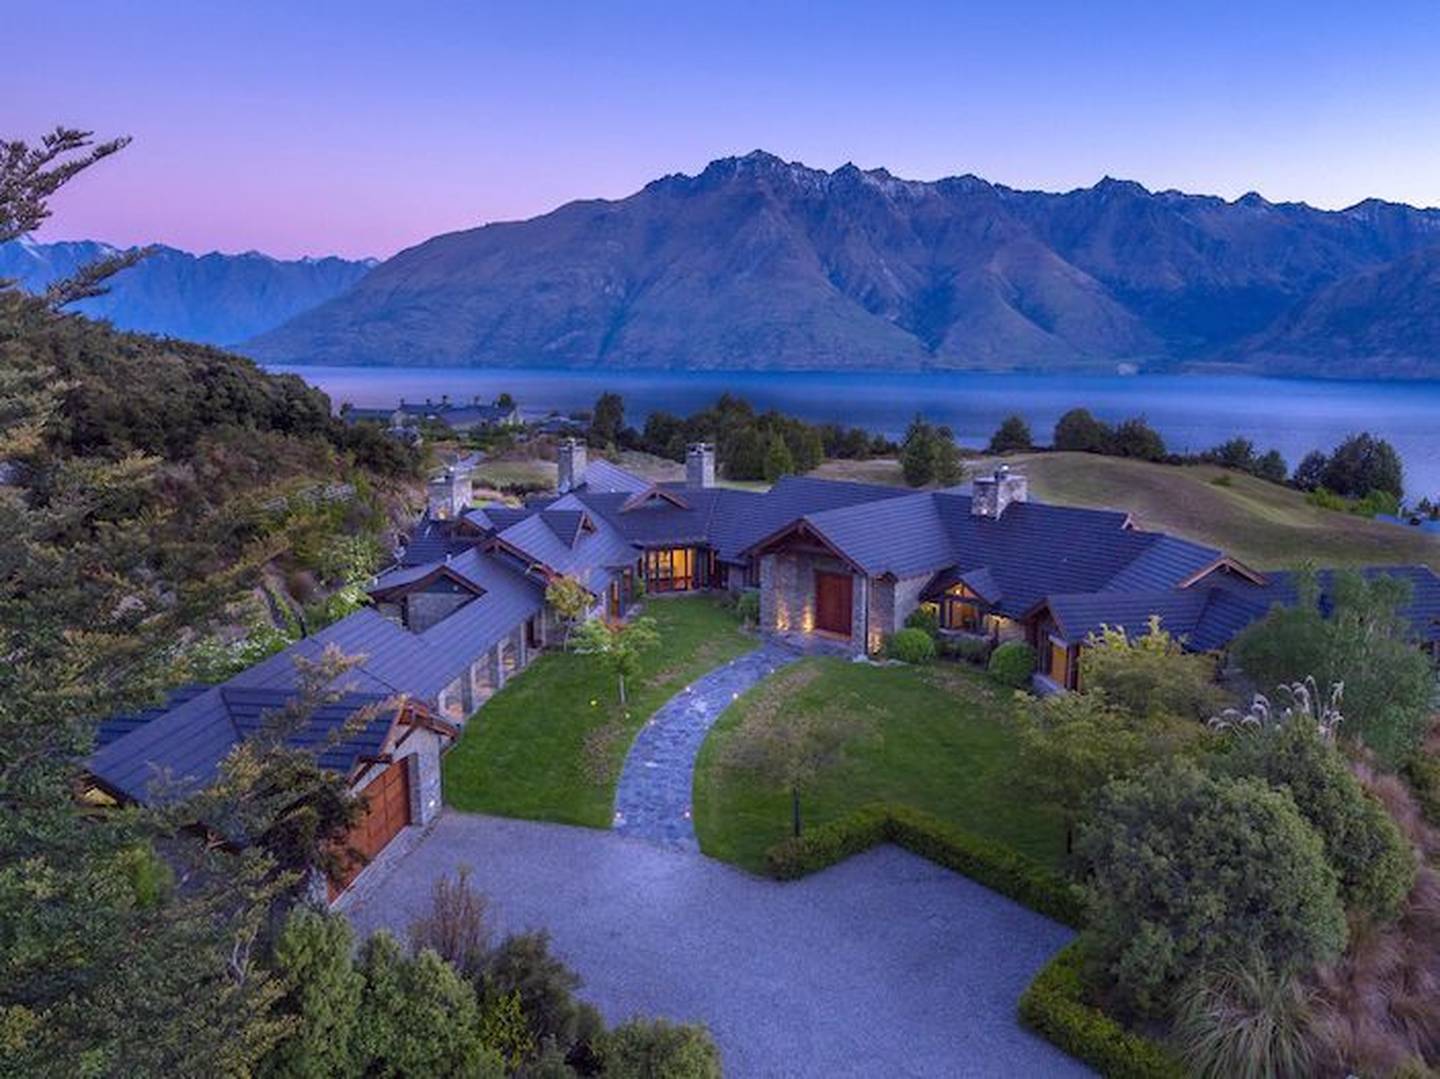 A property option close to Queenstown listed at $12,495,000. Photo / Luxury Real Estate